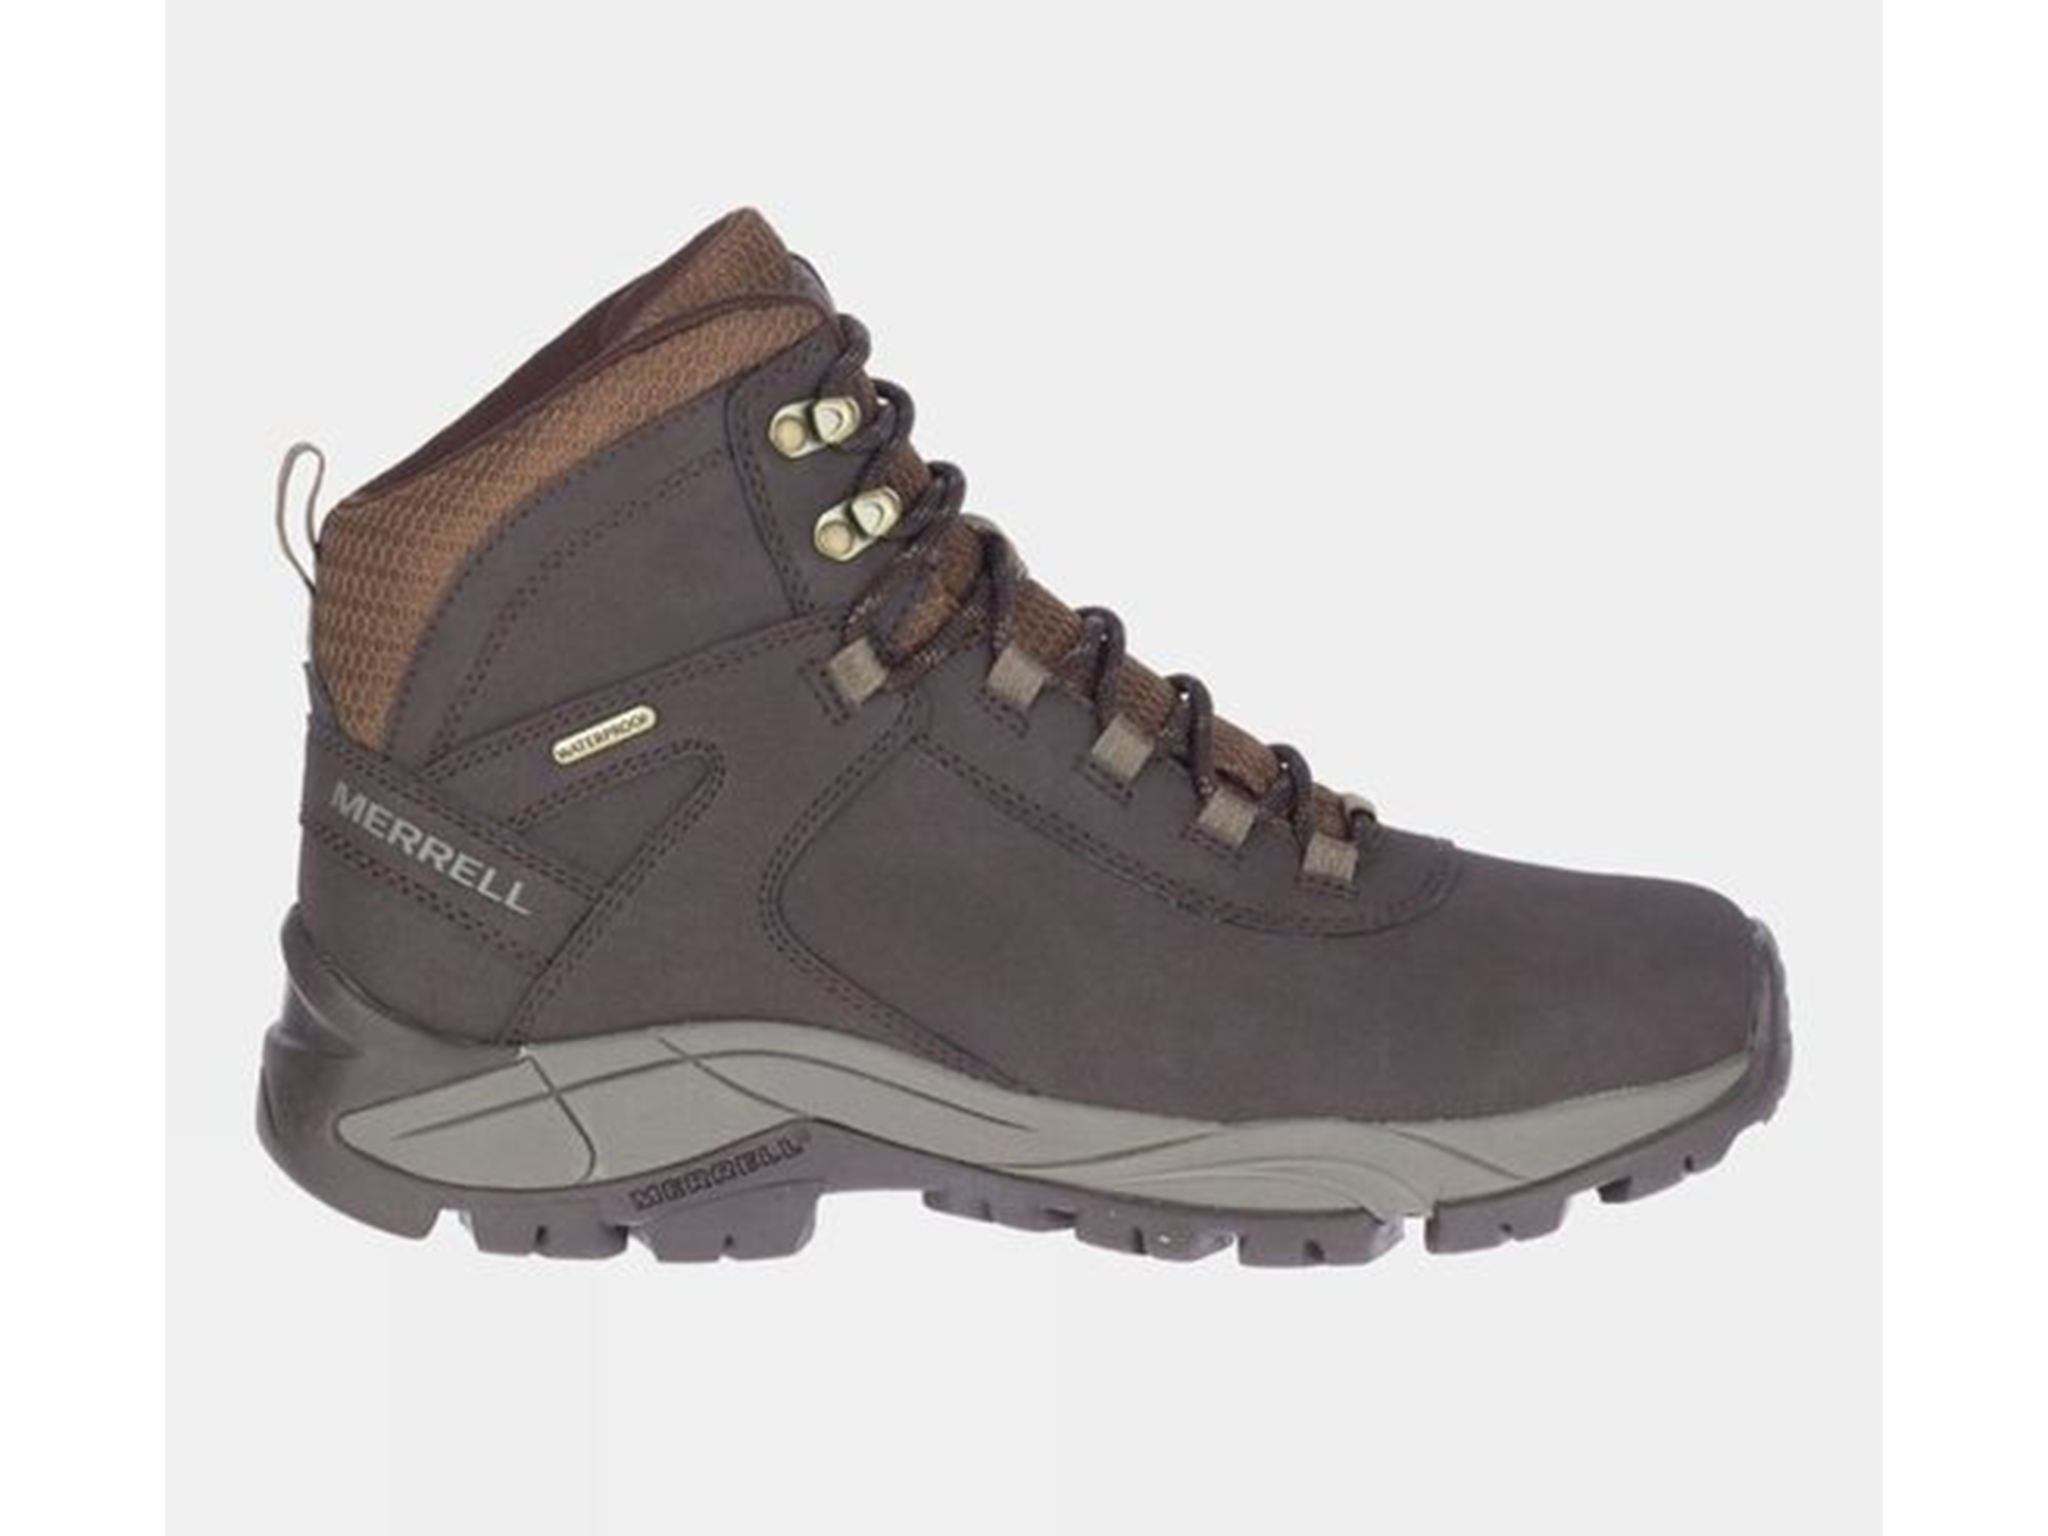 https://www.independent.co.uk/extras/indybest/travel-outdoors/hiking/best-walking-boots-men-hiking-a9620056.html